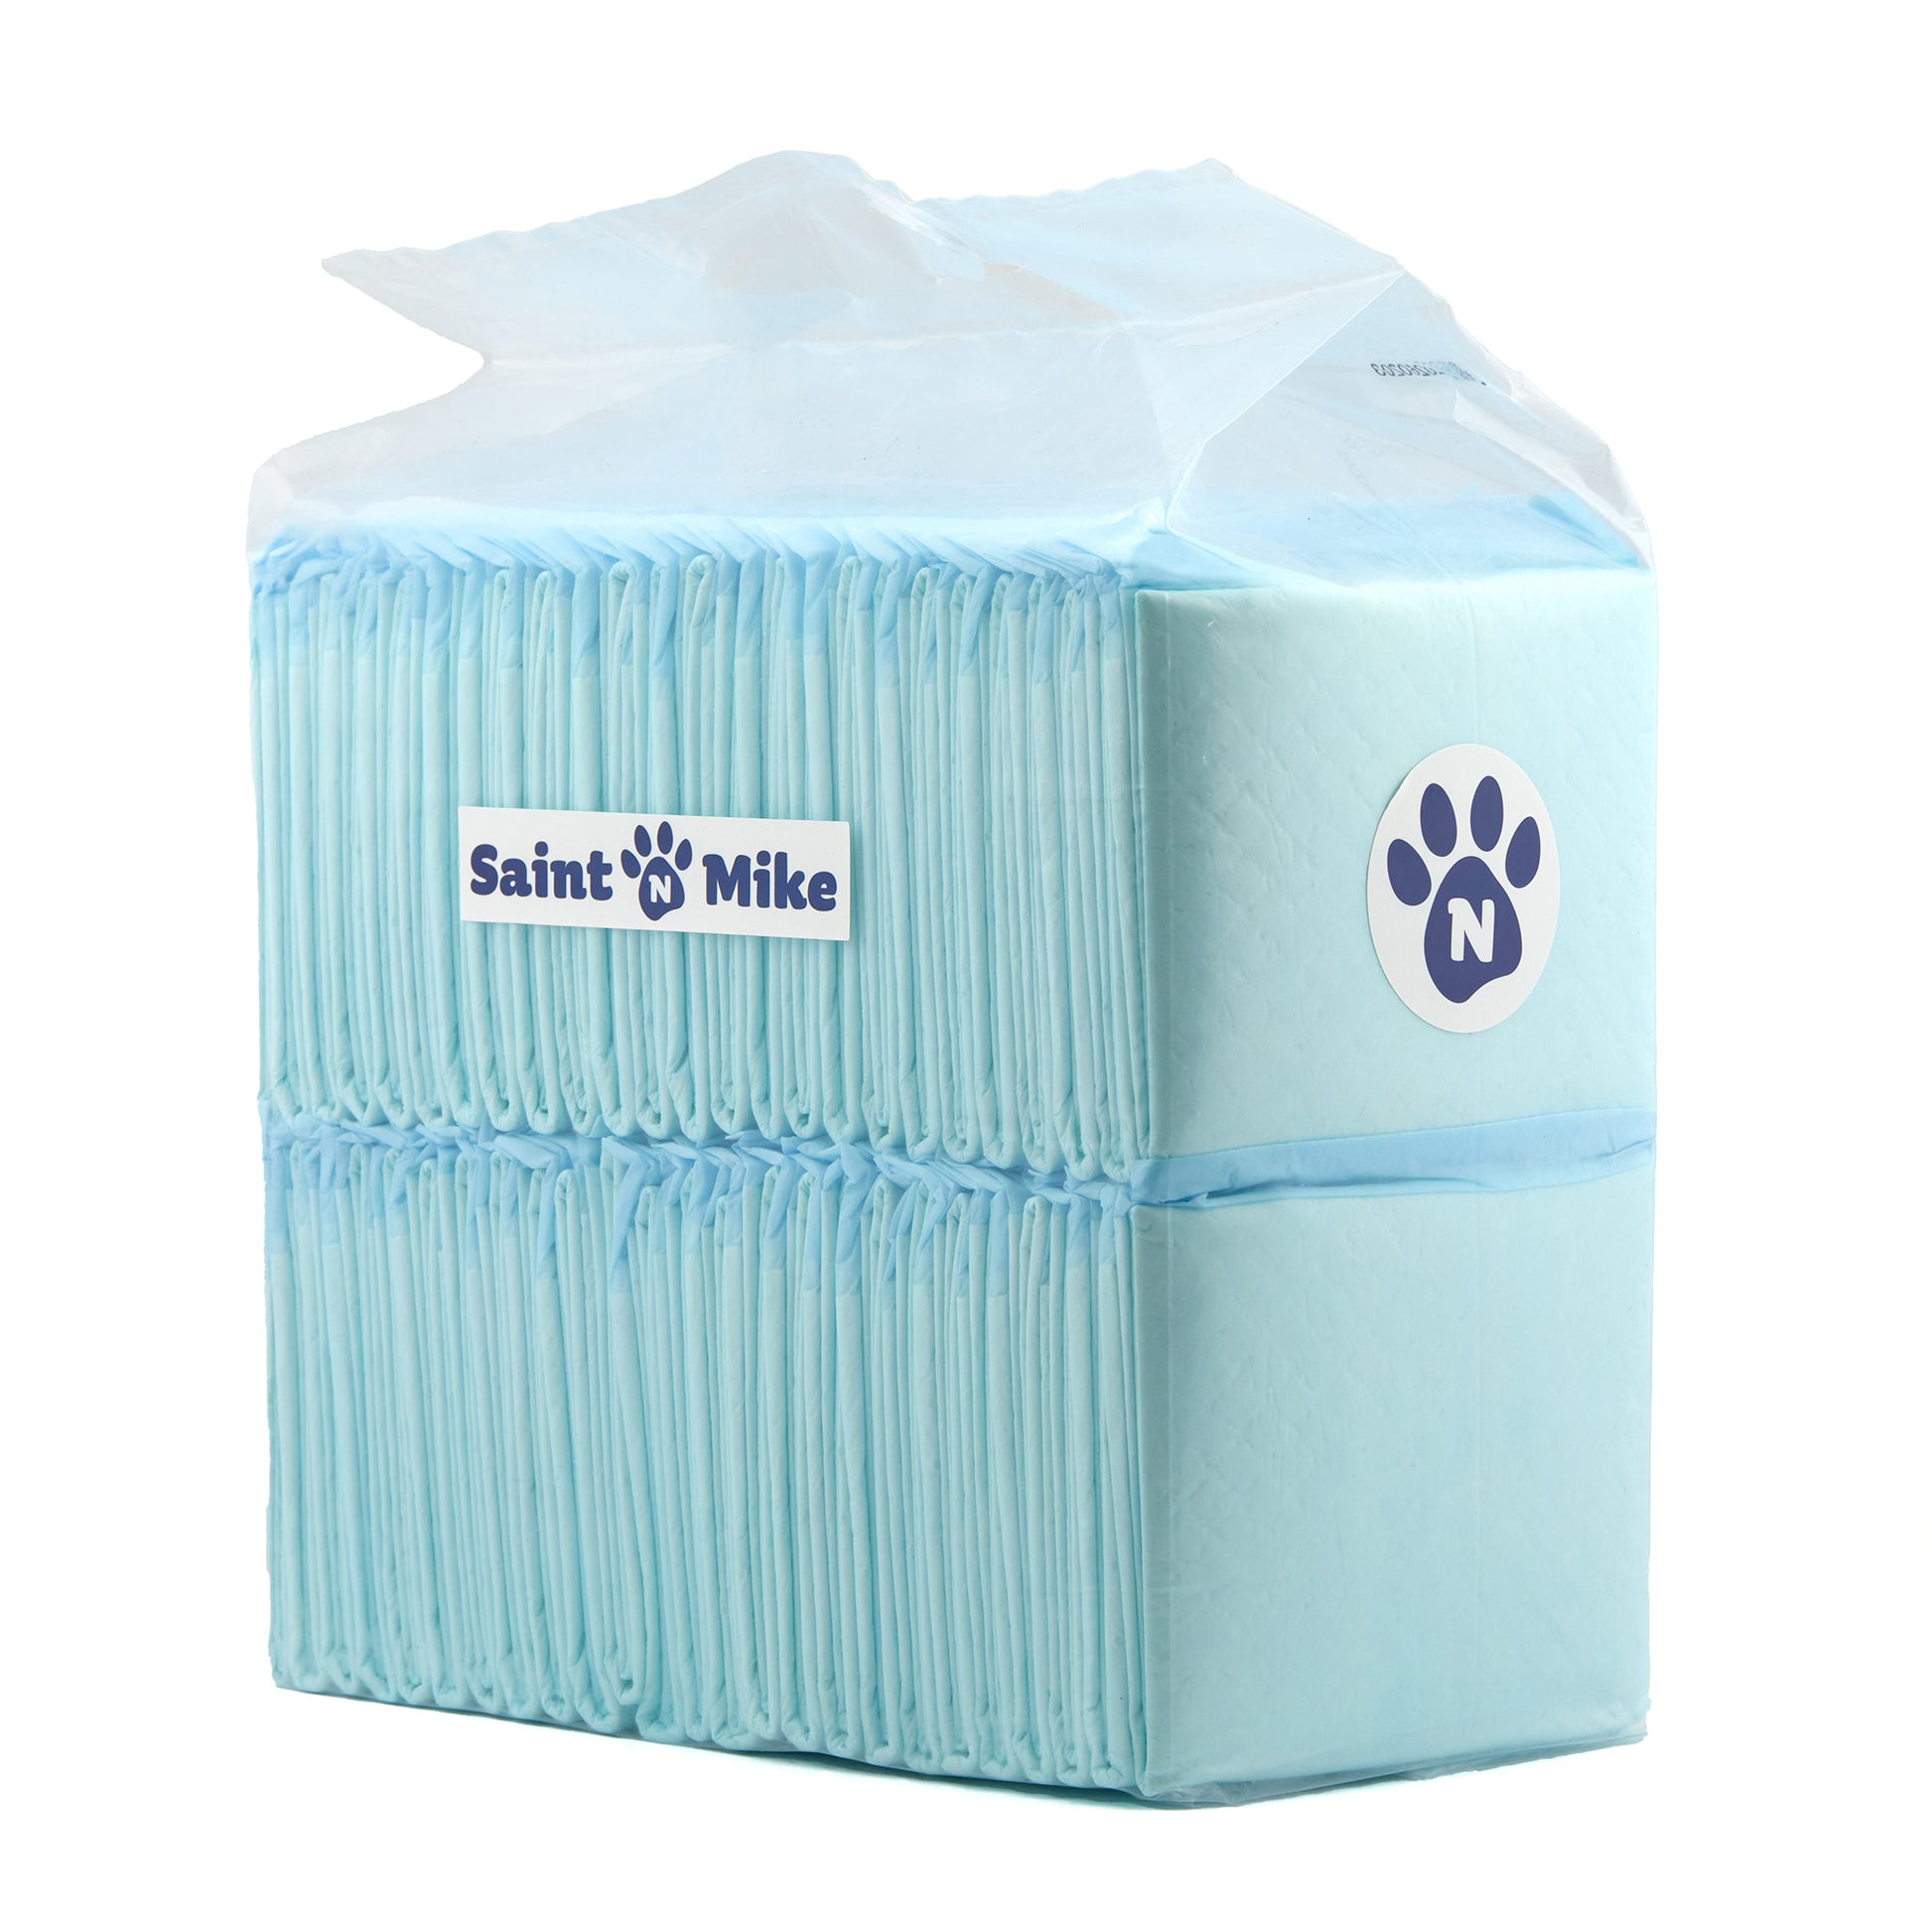 medium size, 100 count high-quality puppy pad leak-proof for hassle-free house training12